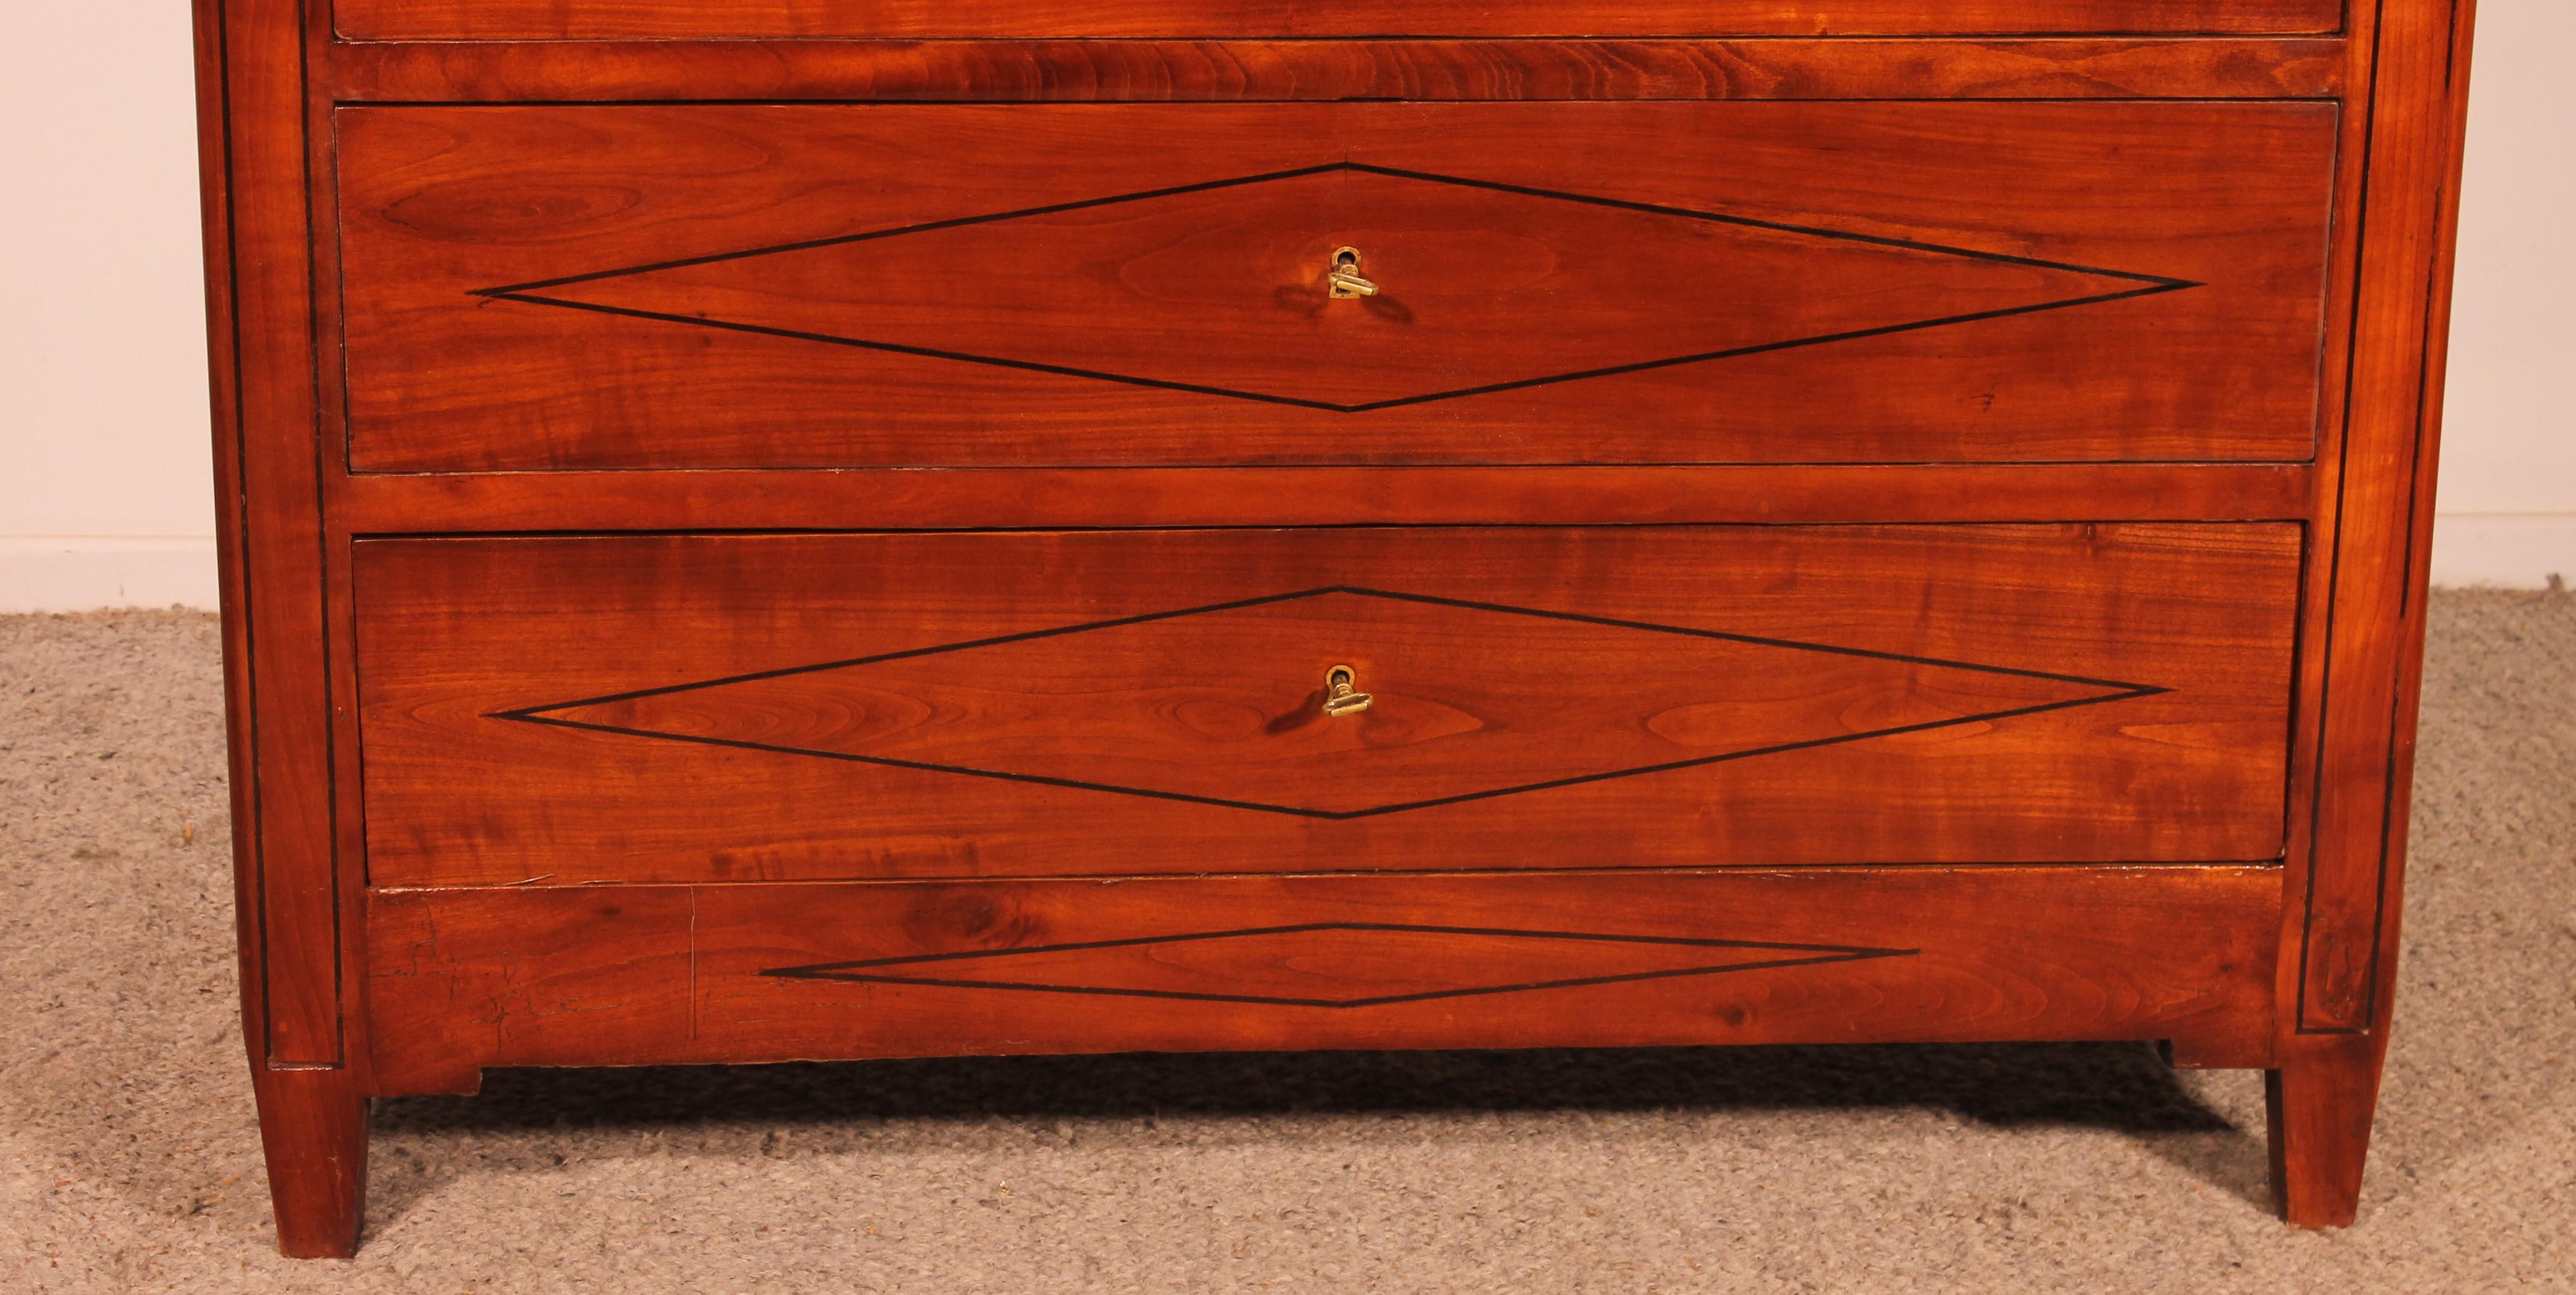 Louis XVI Cherry Wood Chest Of Drawers From The 19th Century For Sale